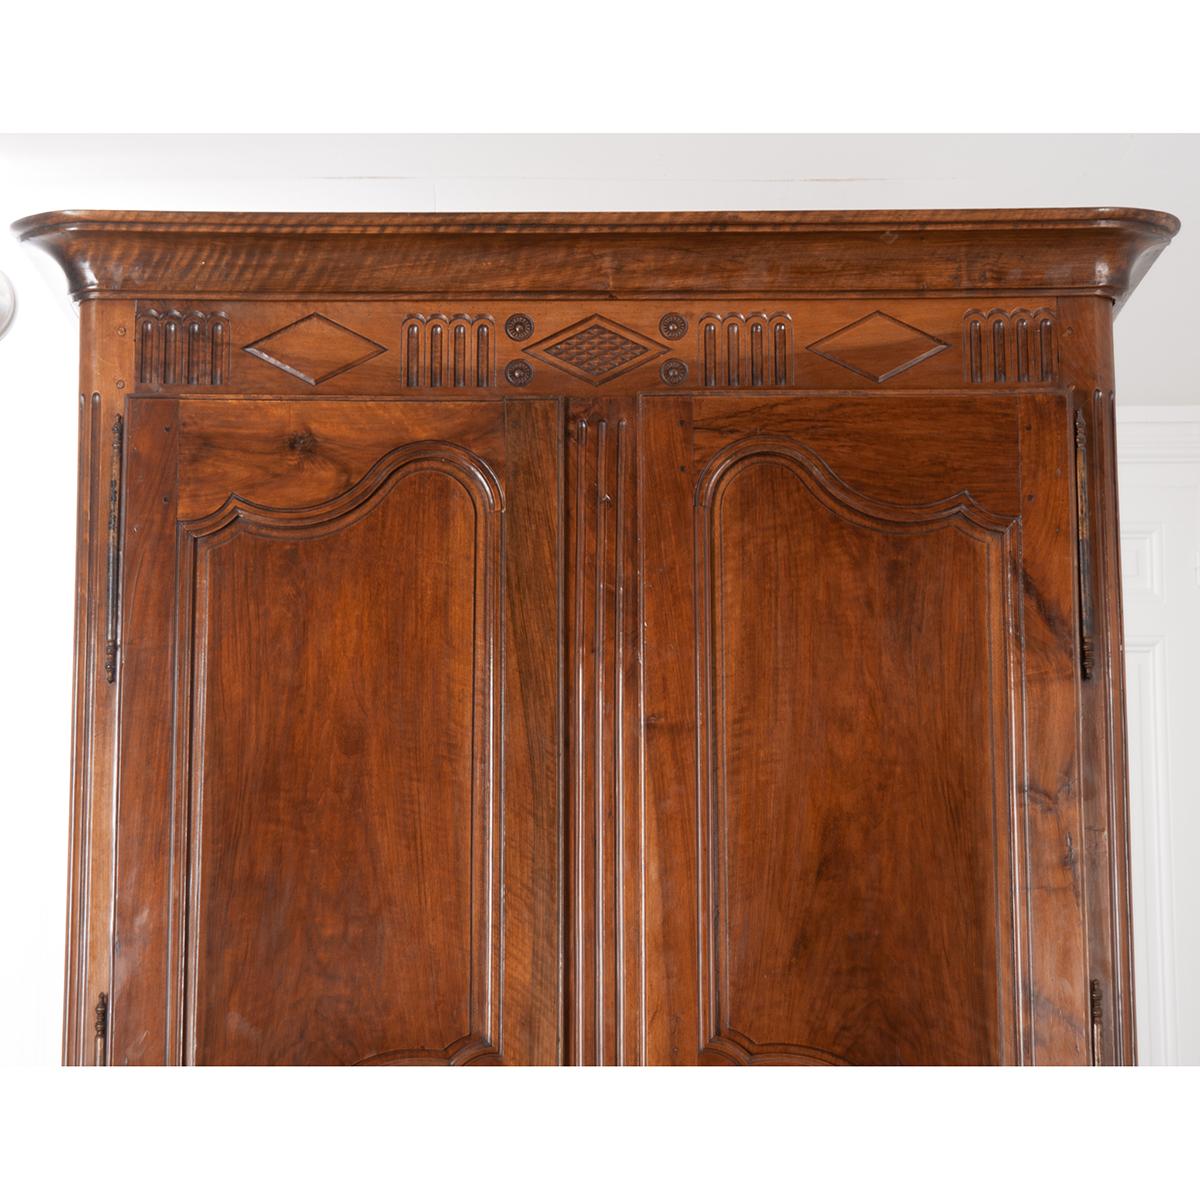 An absolutely stunning hand-carved, hand-pegged walnut armoire. A large Louis Philippe-style crown cornice sits just above a carved Directoire-style frieze. Two large, Louis XV-style shaped doors equipped with a working lock and latch are hung on